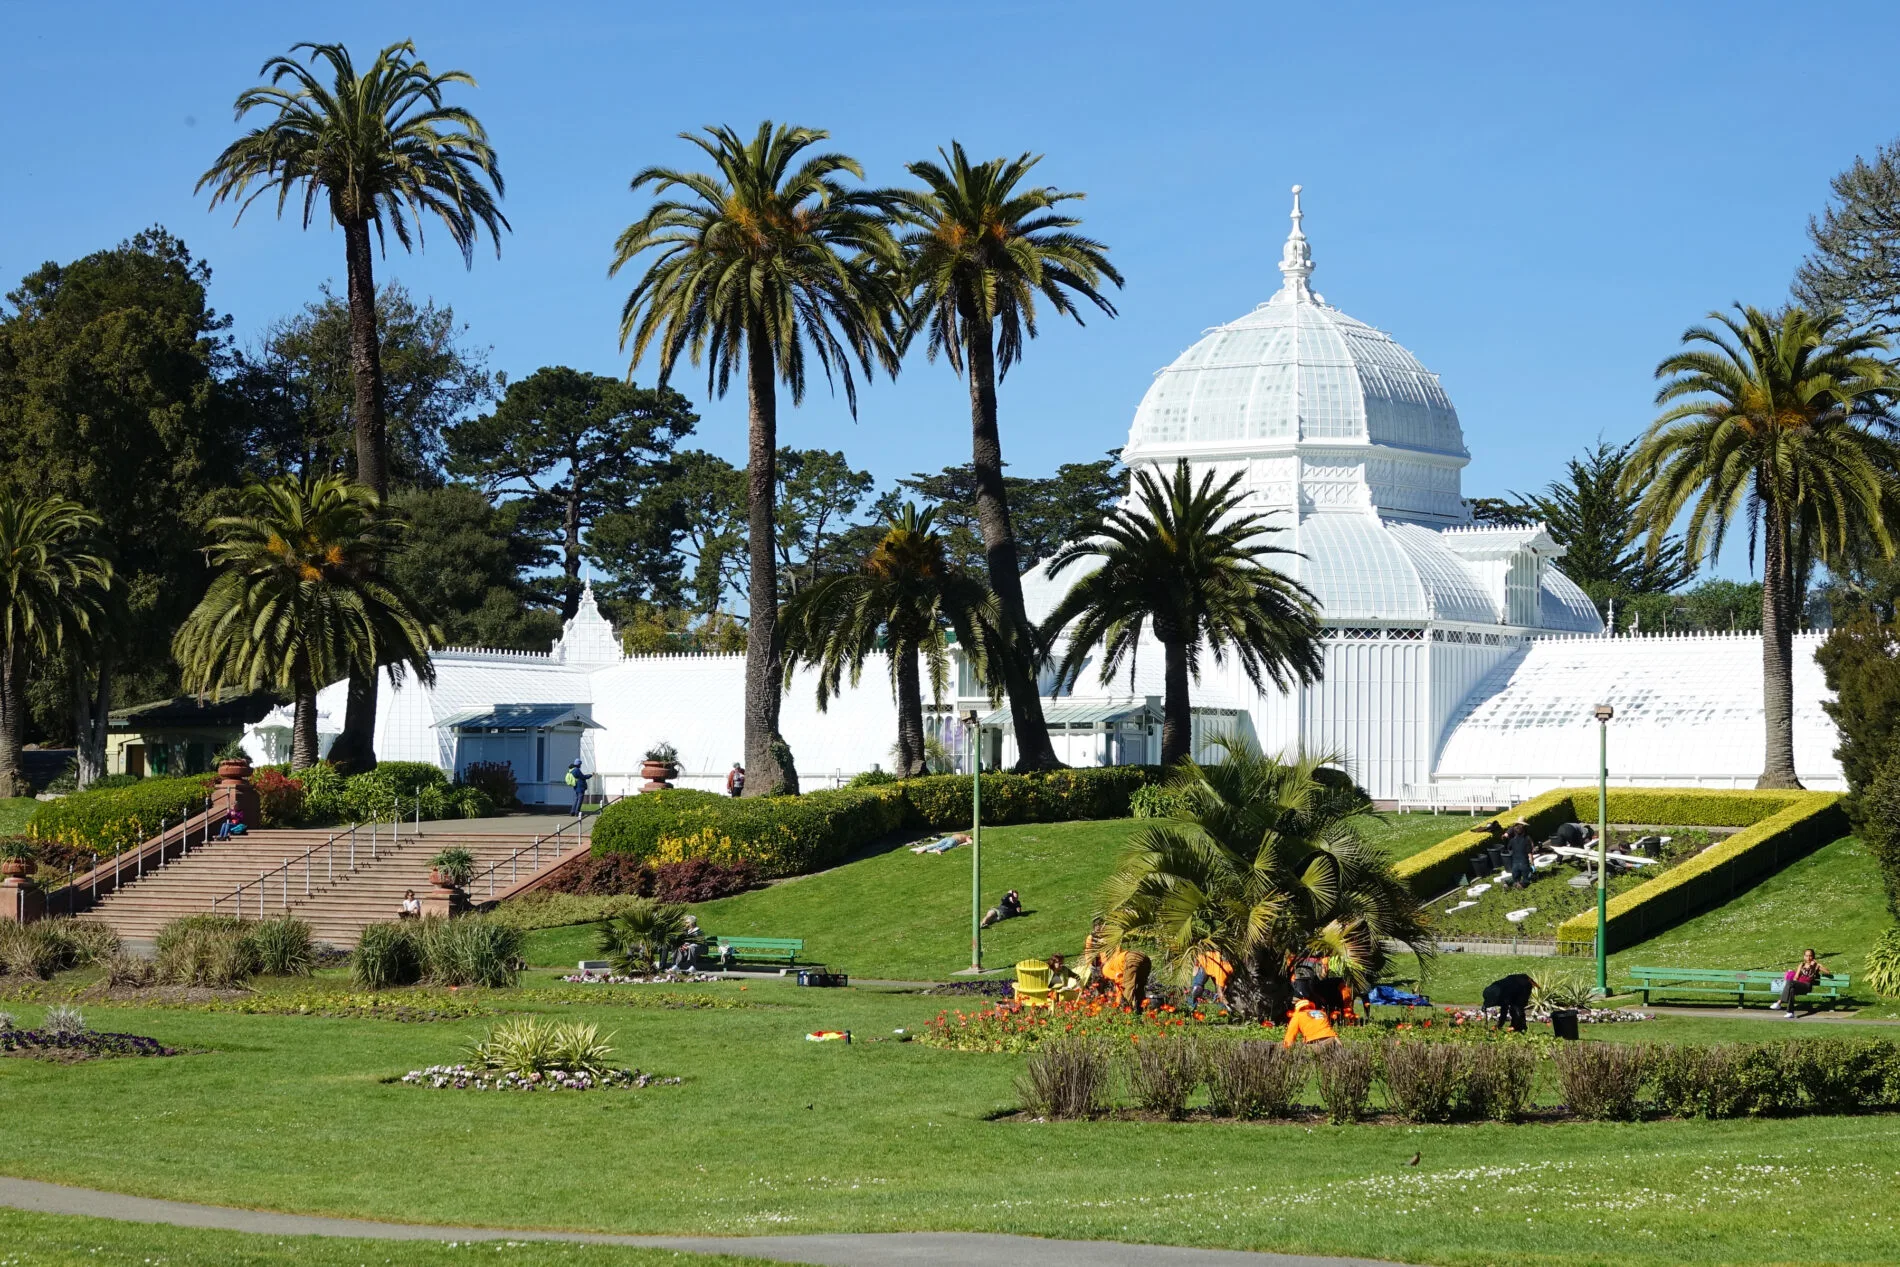 The Conservatory of Flowers is a beautiful glass and wood greenhouse with a great collection of rare and exotic plants.